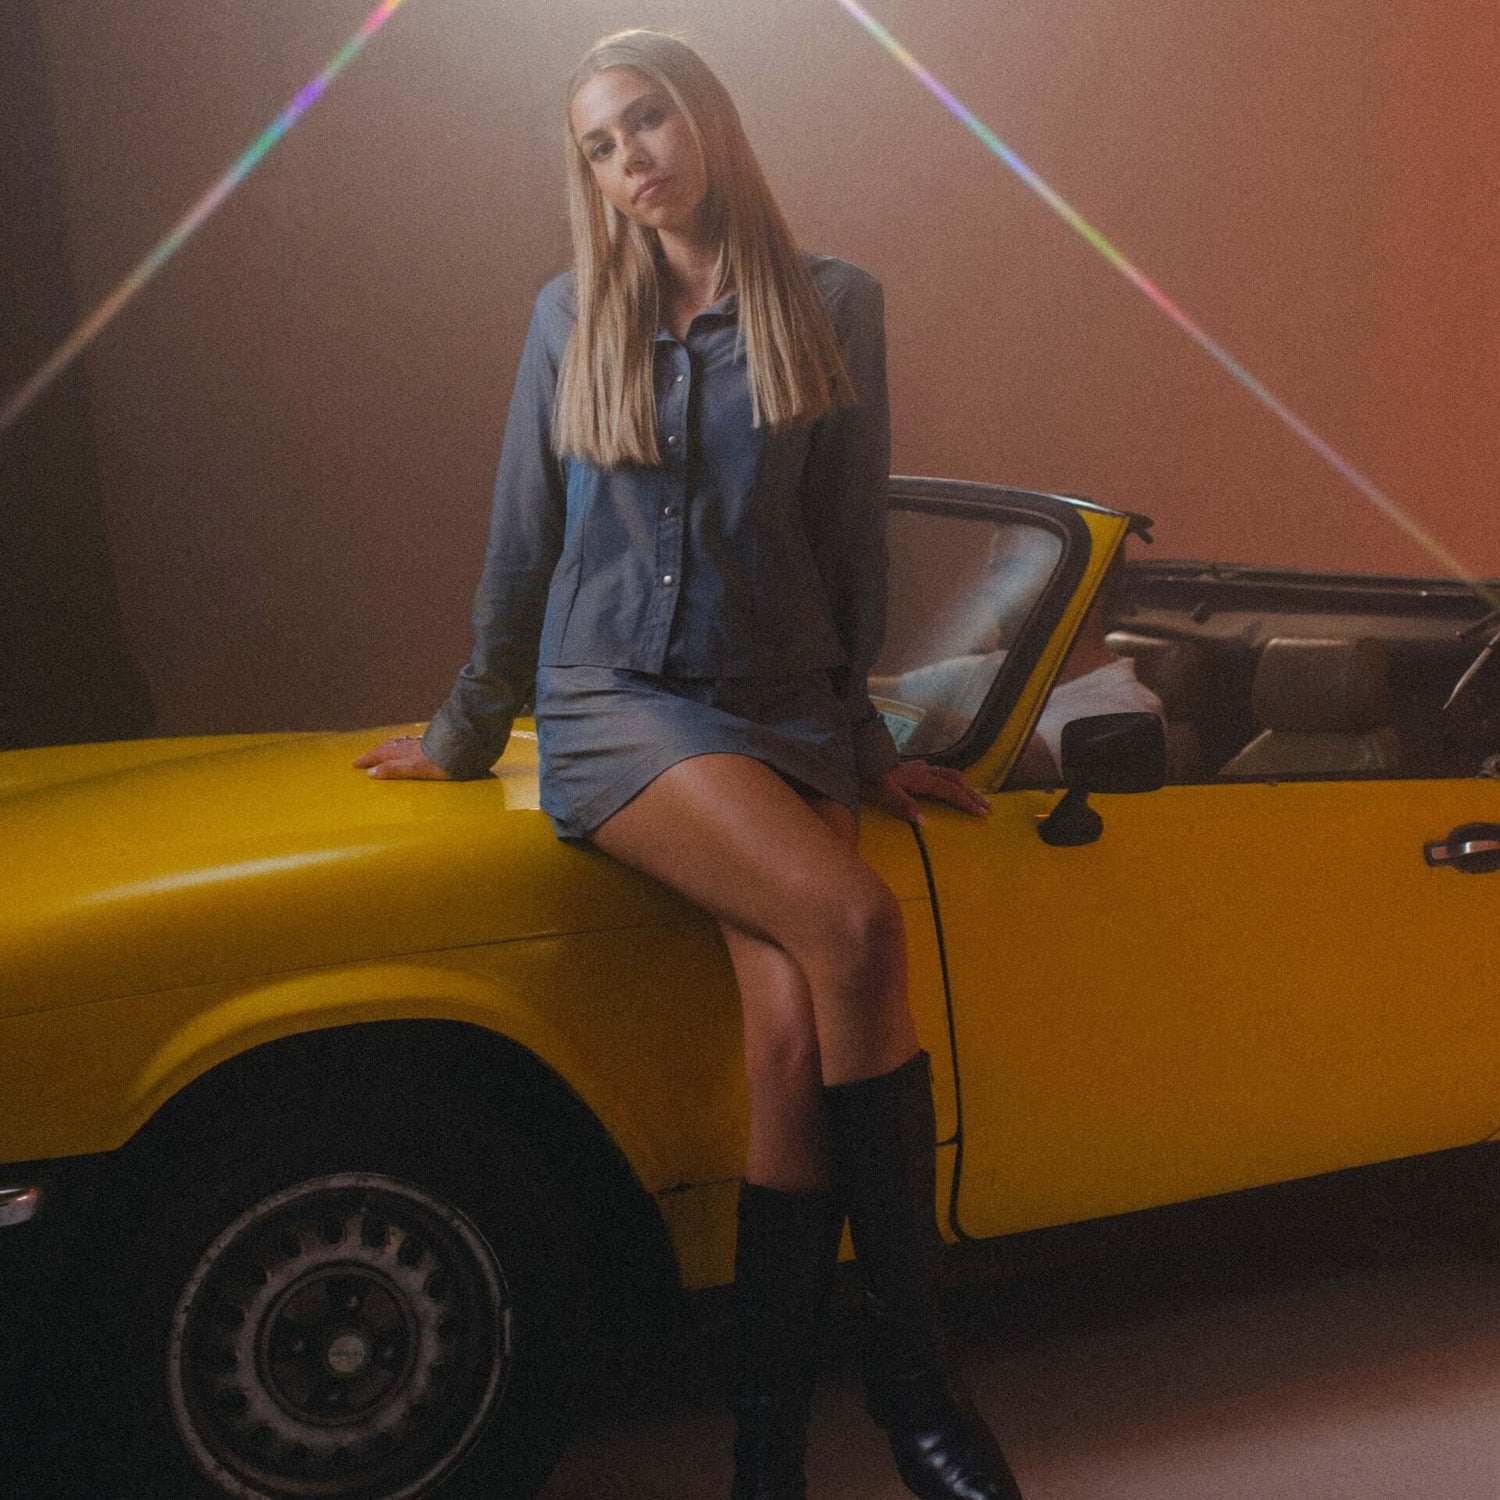 Saharaa music never leave cover art. Saharaa sitting on a yellow sports car dressed in a grey Beachbrains skirt and top